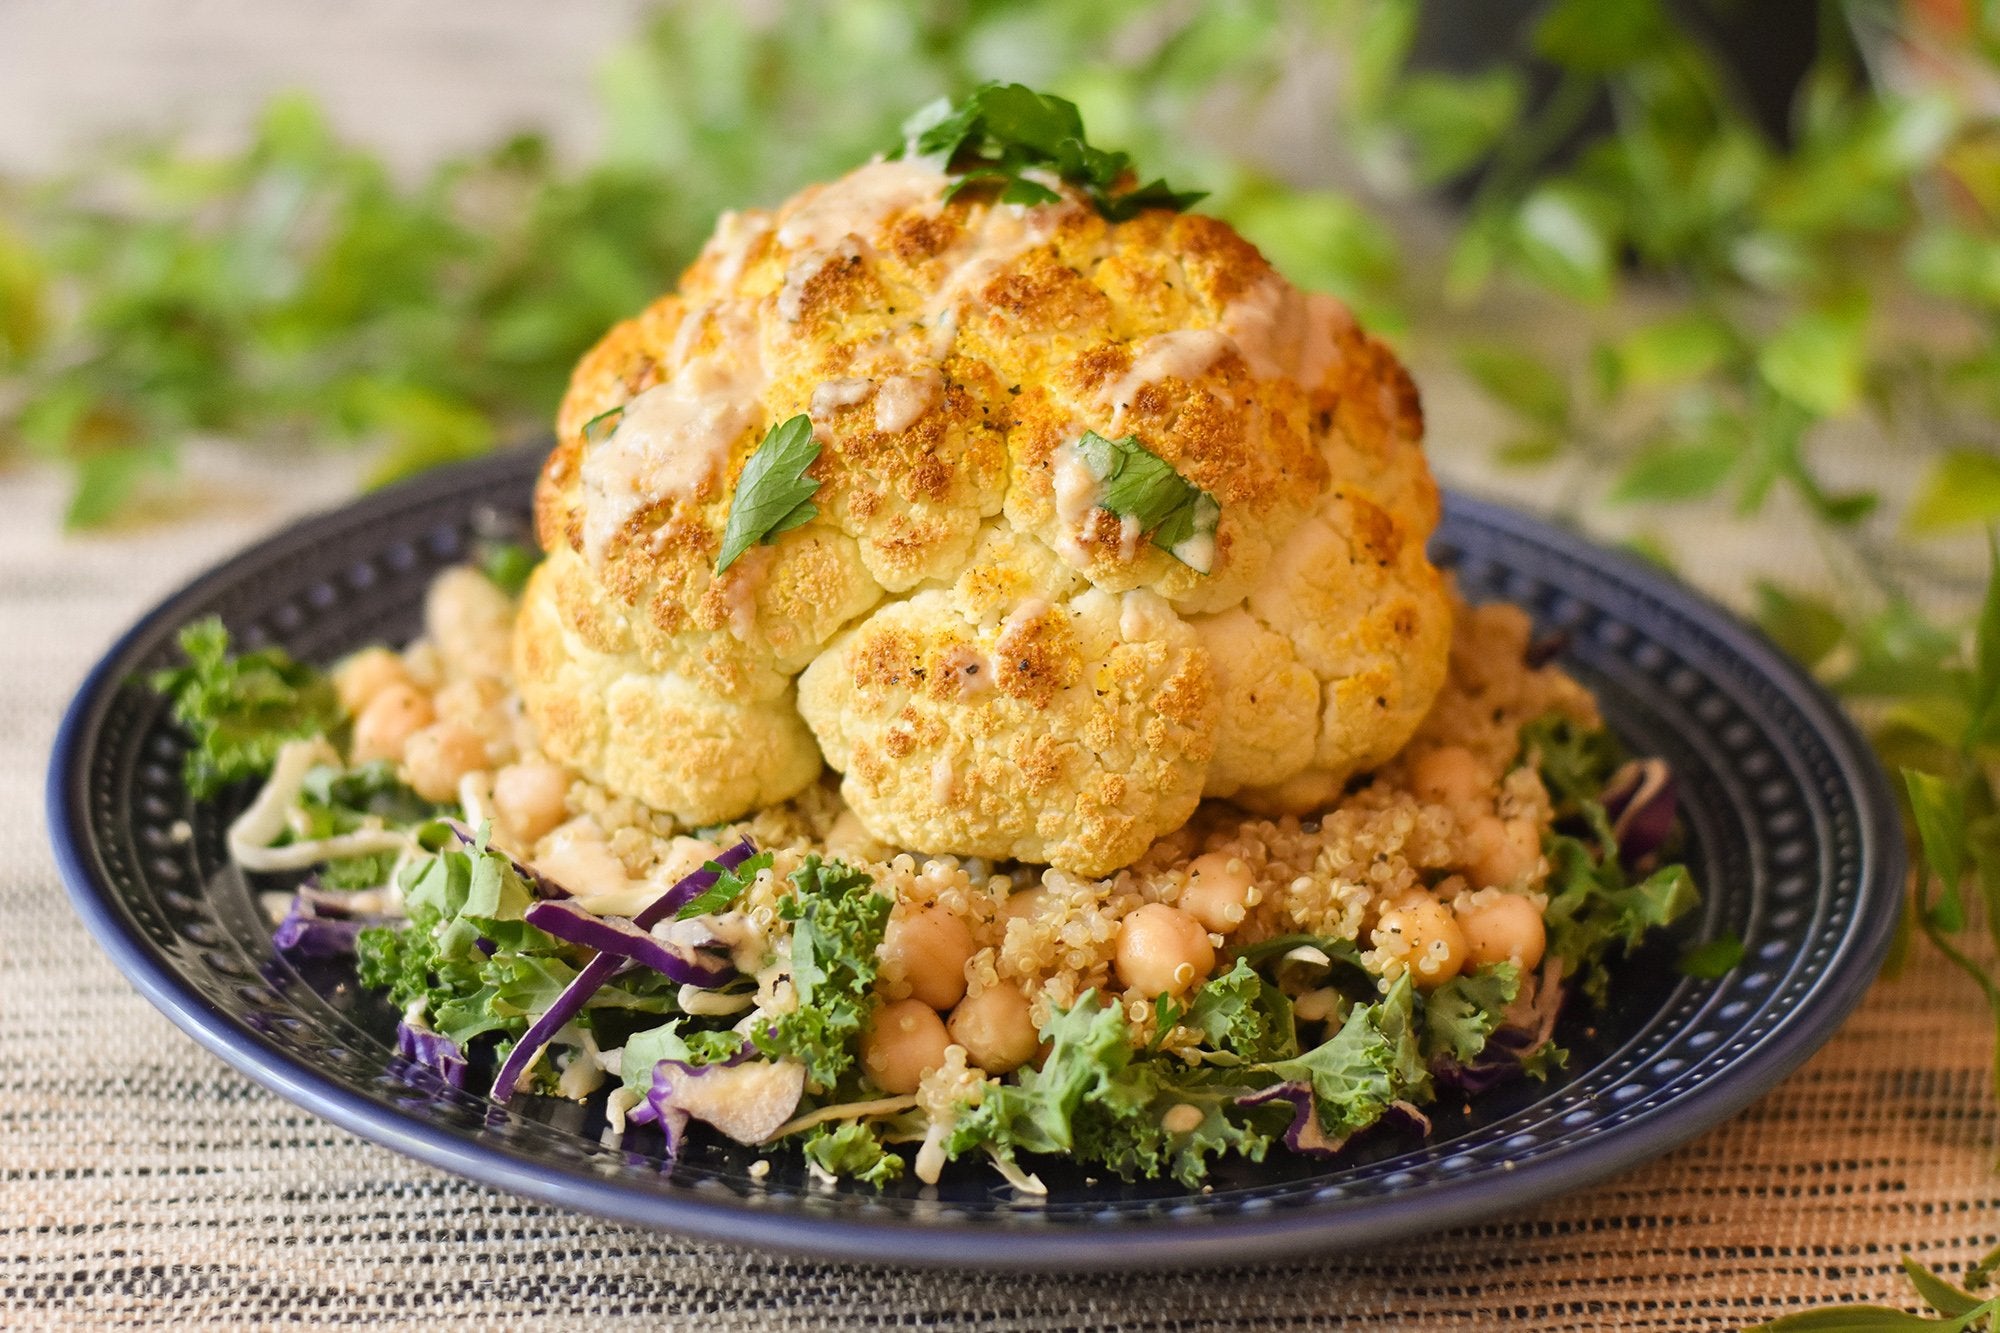 Roasted Cauliflower with Quinoa and Chickpea Pilaf